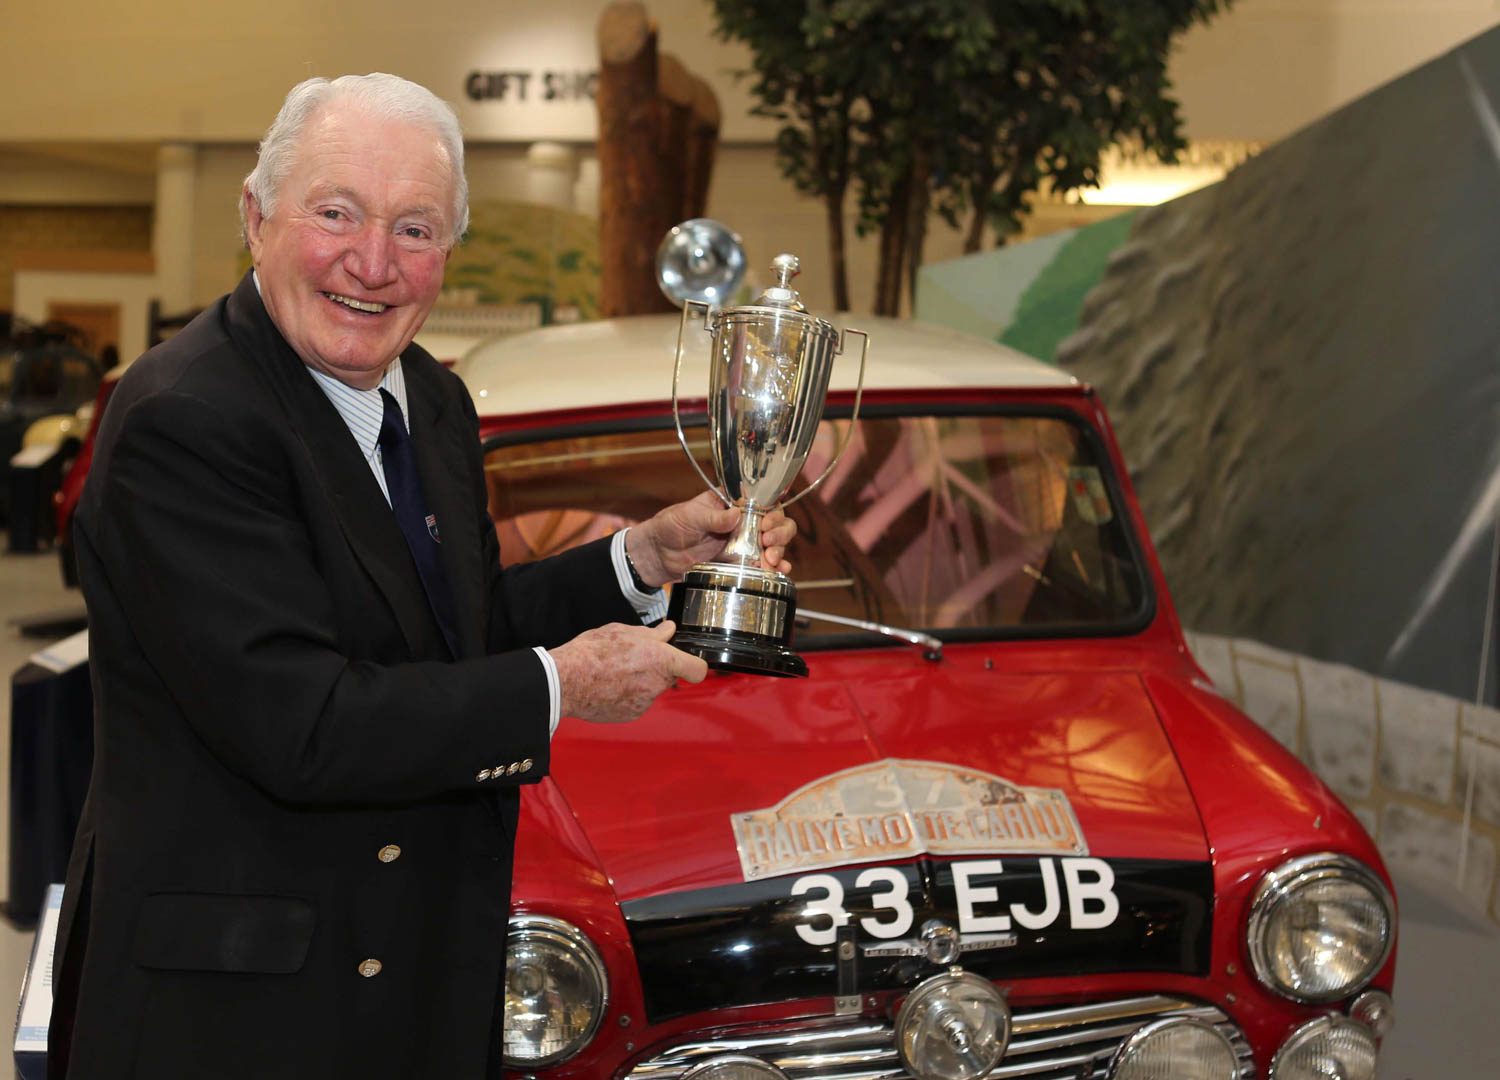 Paddy Hopkirk remembers the 1964 Monte Carlo Rally: “We’d no idea we’d won. It made us world-famous overnight.”